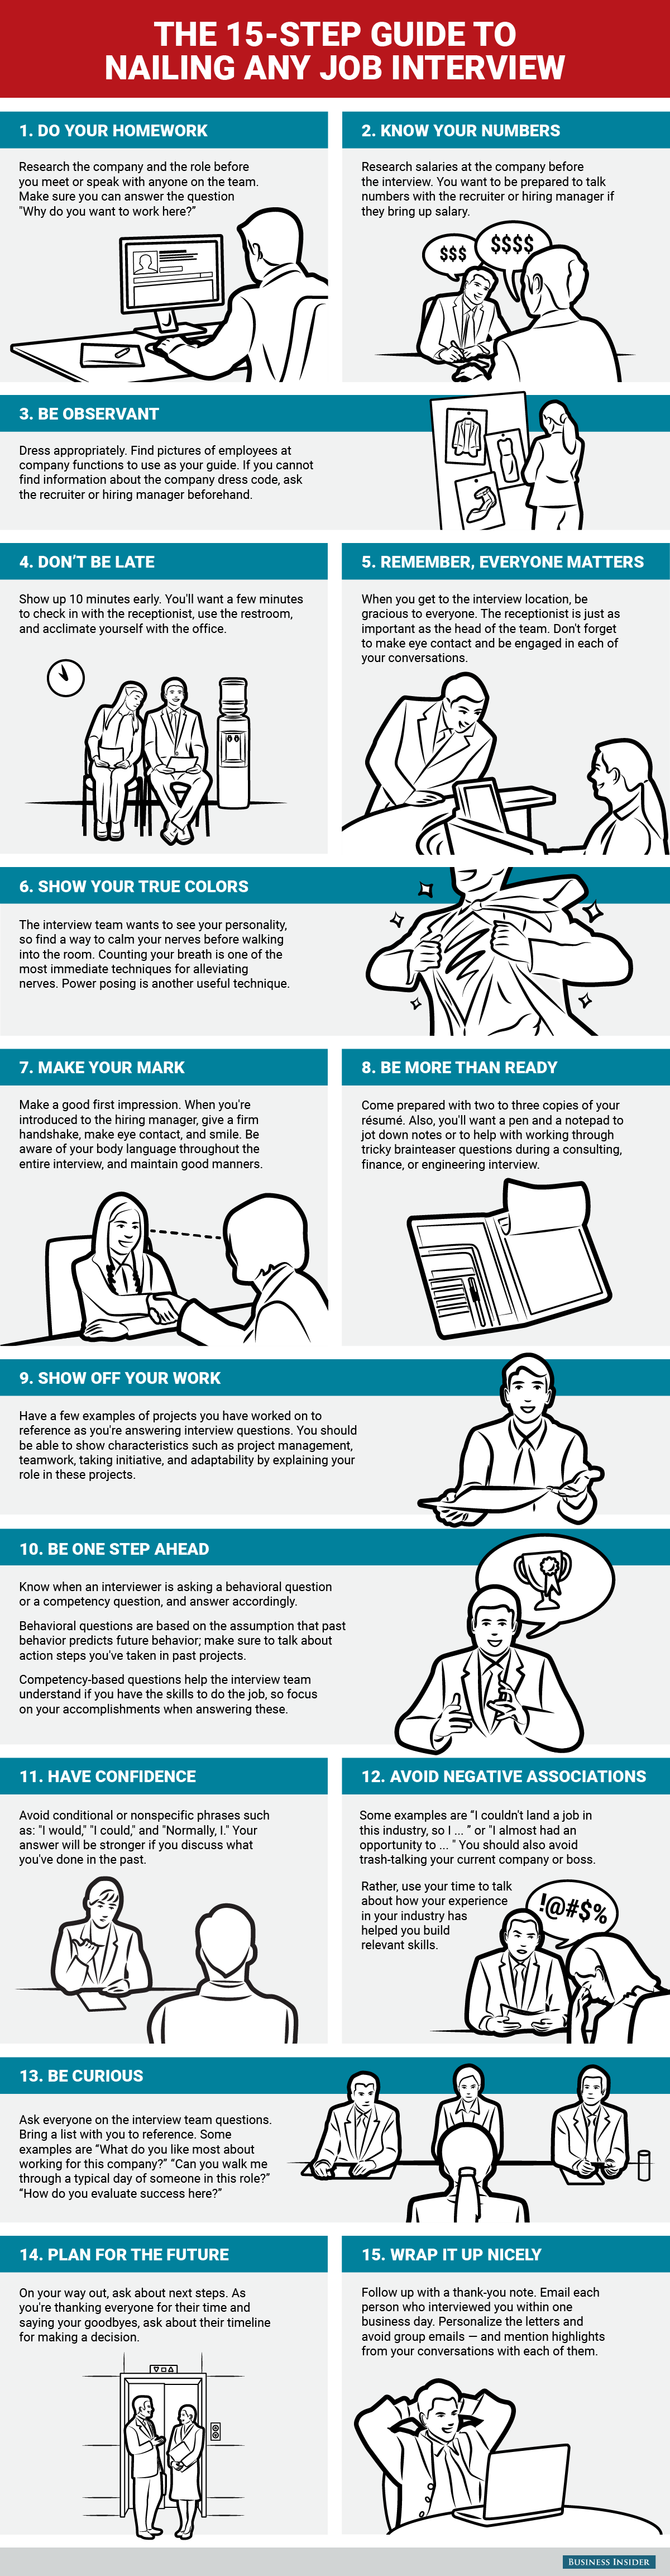 nail-any-job-interview-infographic-3